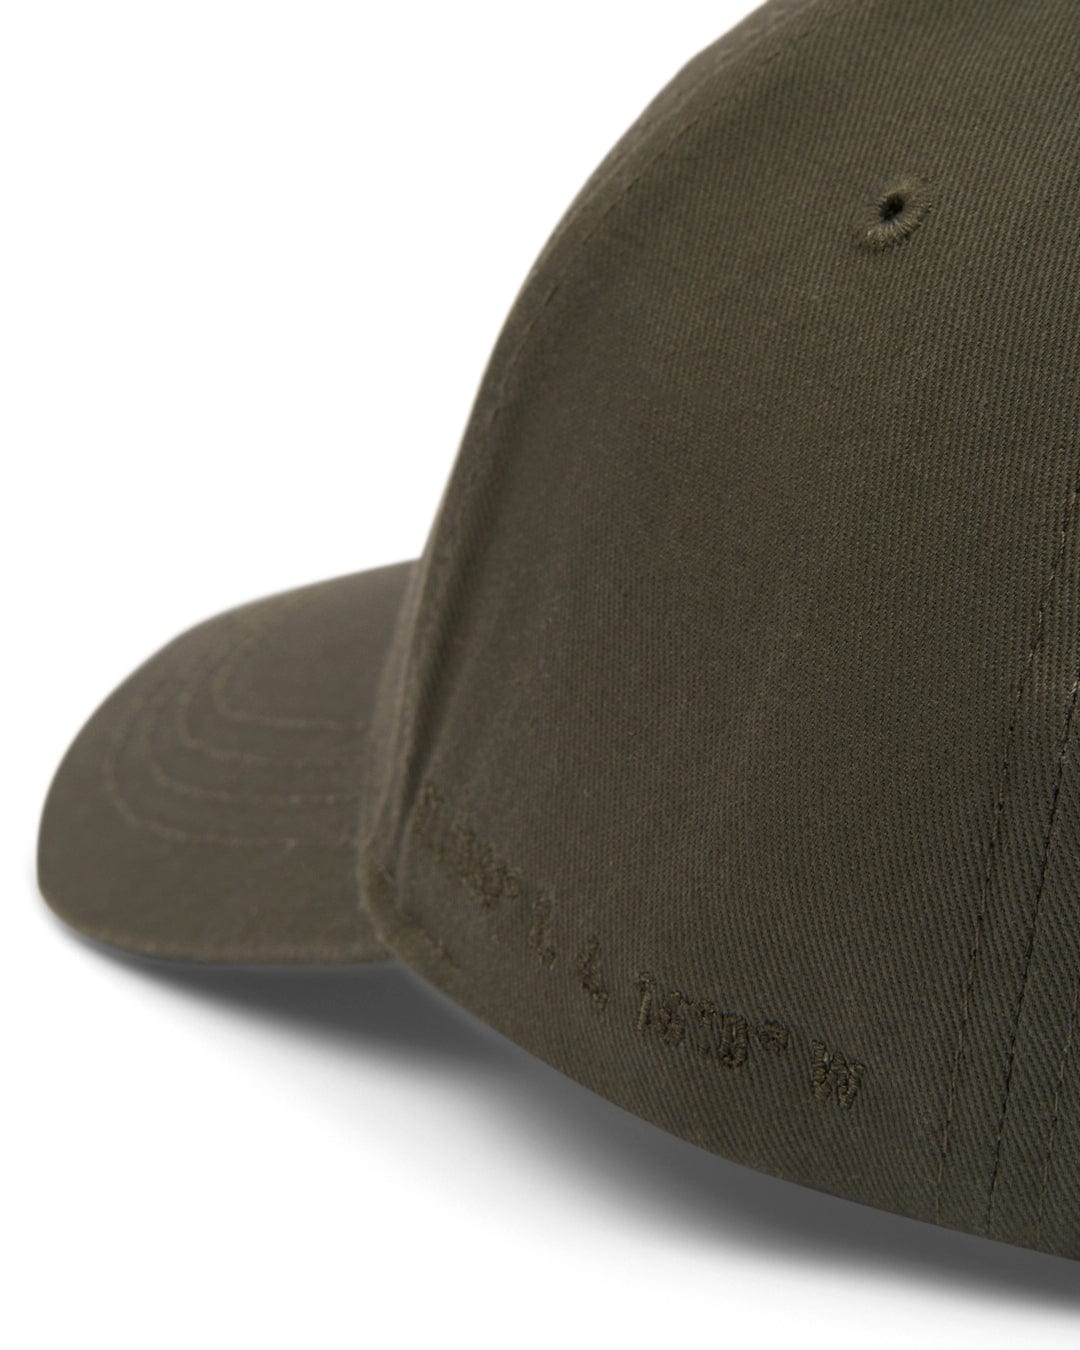 Close-up view of a plain olive green Dockyard baseball cap with an embroidered Saltrock badge on the side.